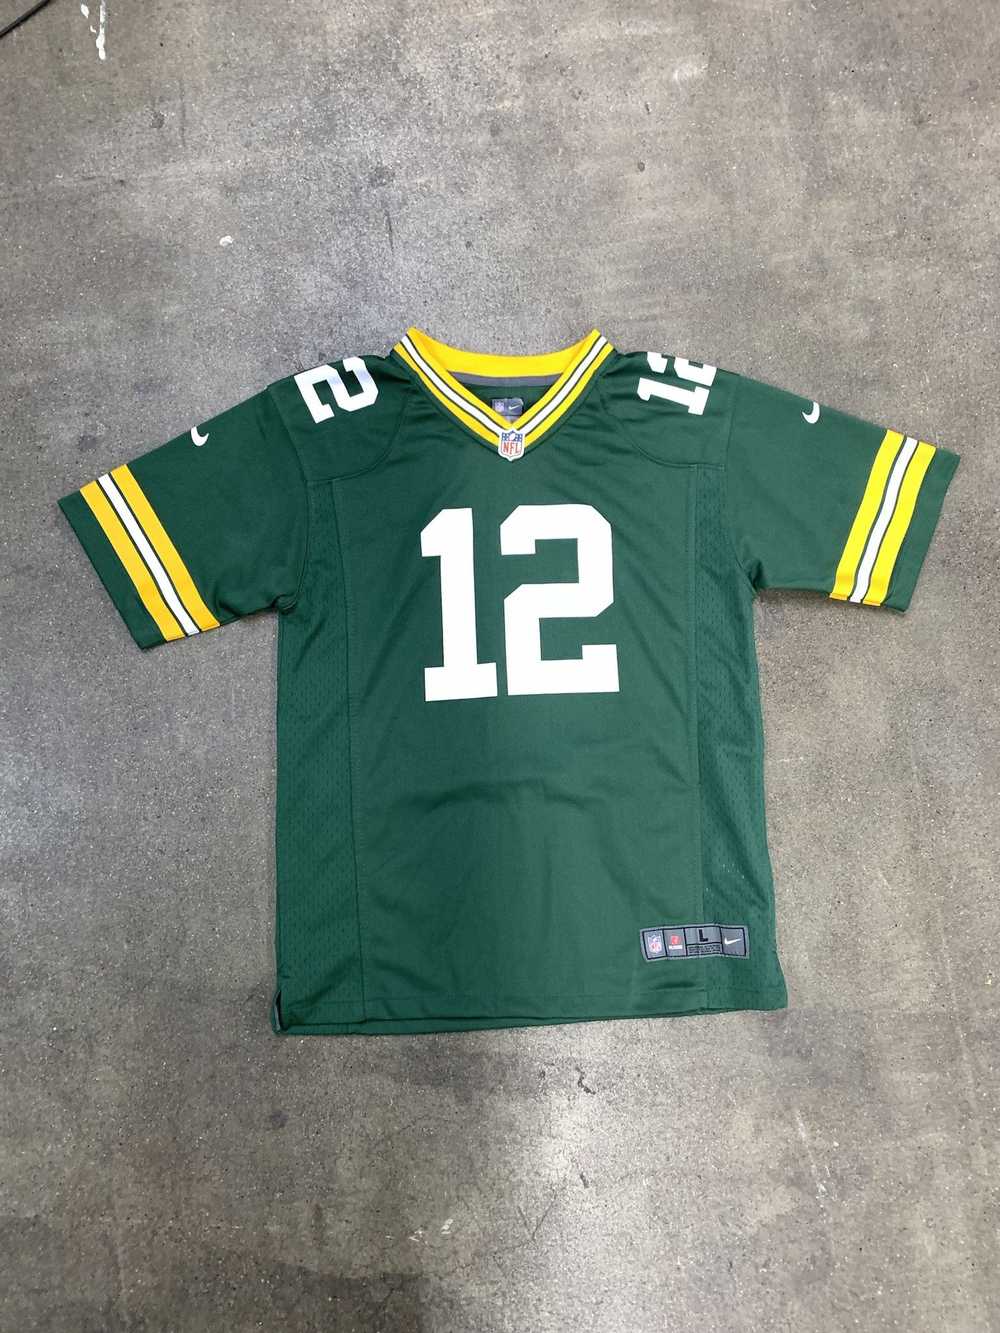 NFL × Vintage Nike Aaron Rodgers #12 Jersey Green… - image 1